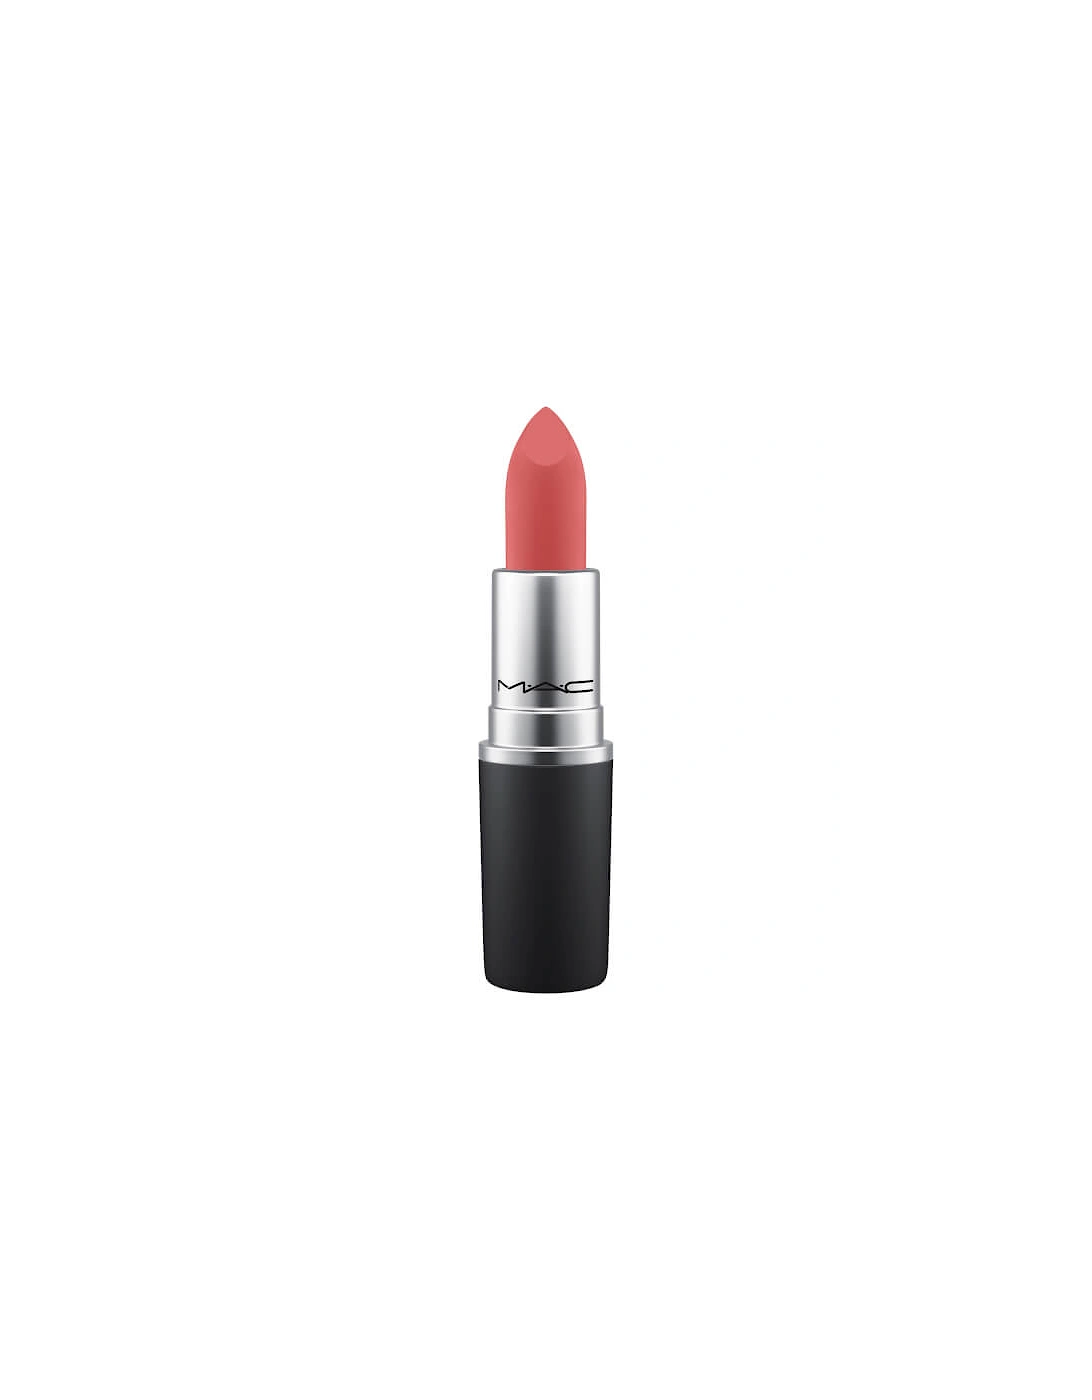 Powder Kiss Lipstick - Sheer Outrage, 2 of 1